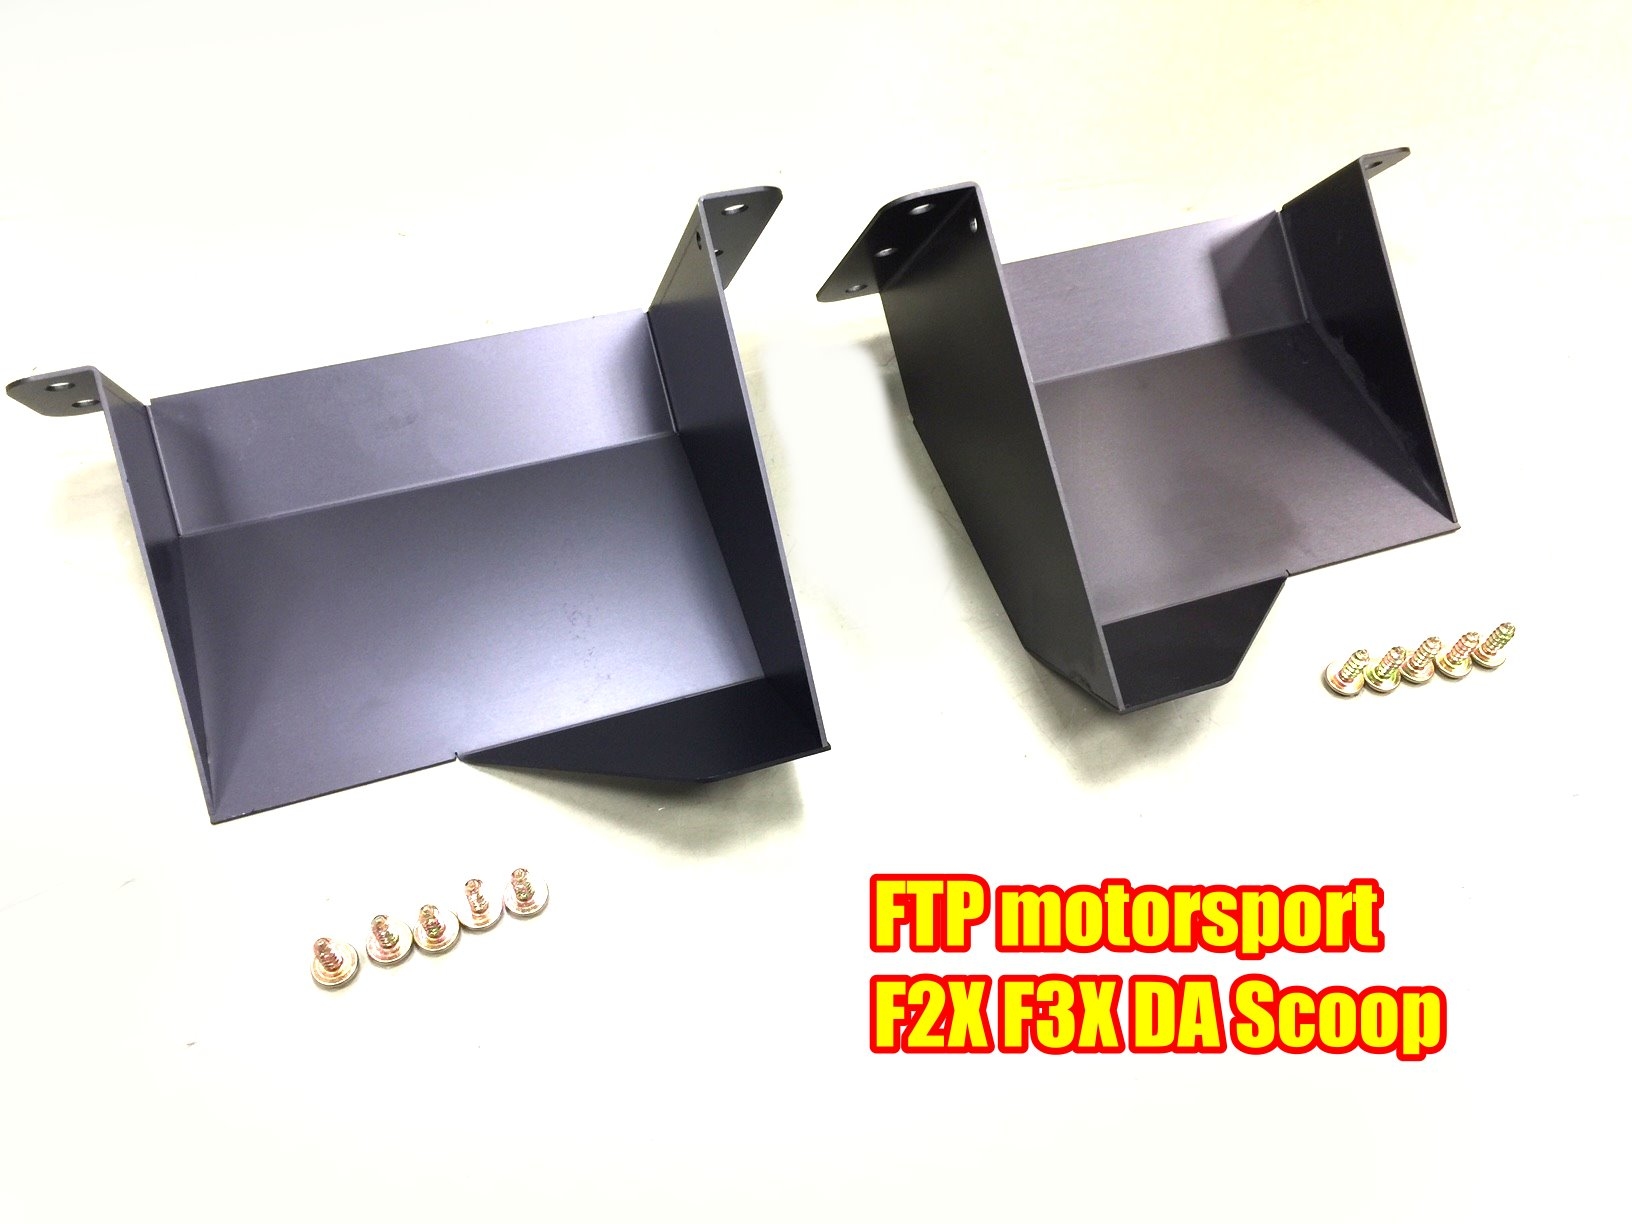 FTP BMW Throttle Body Spacer